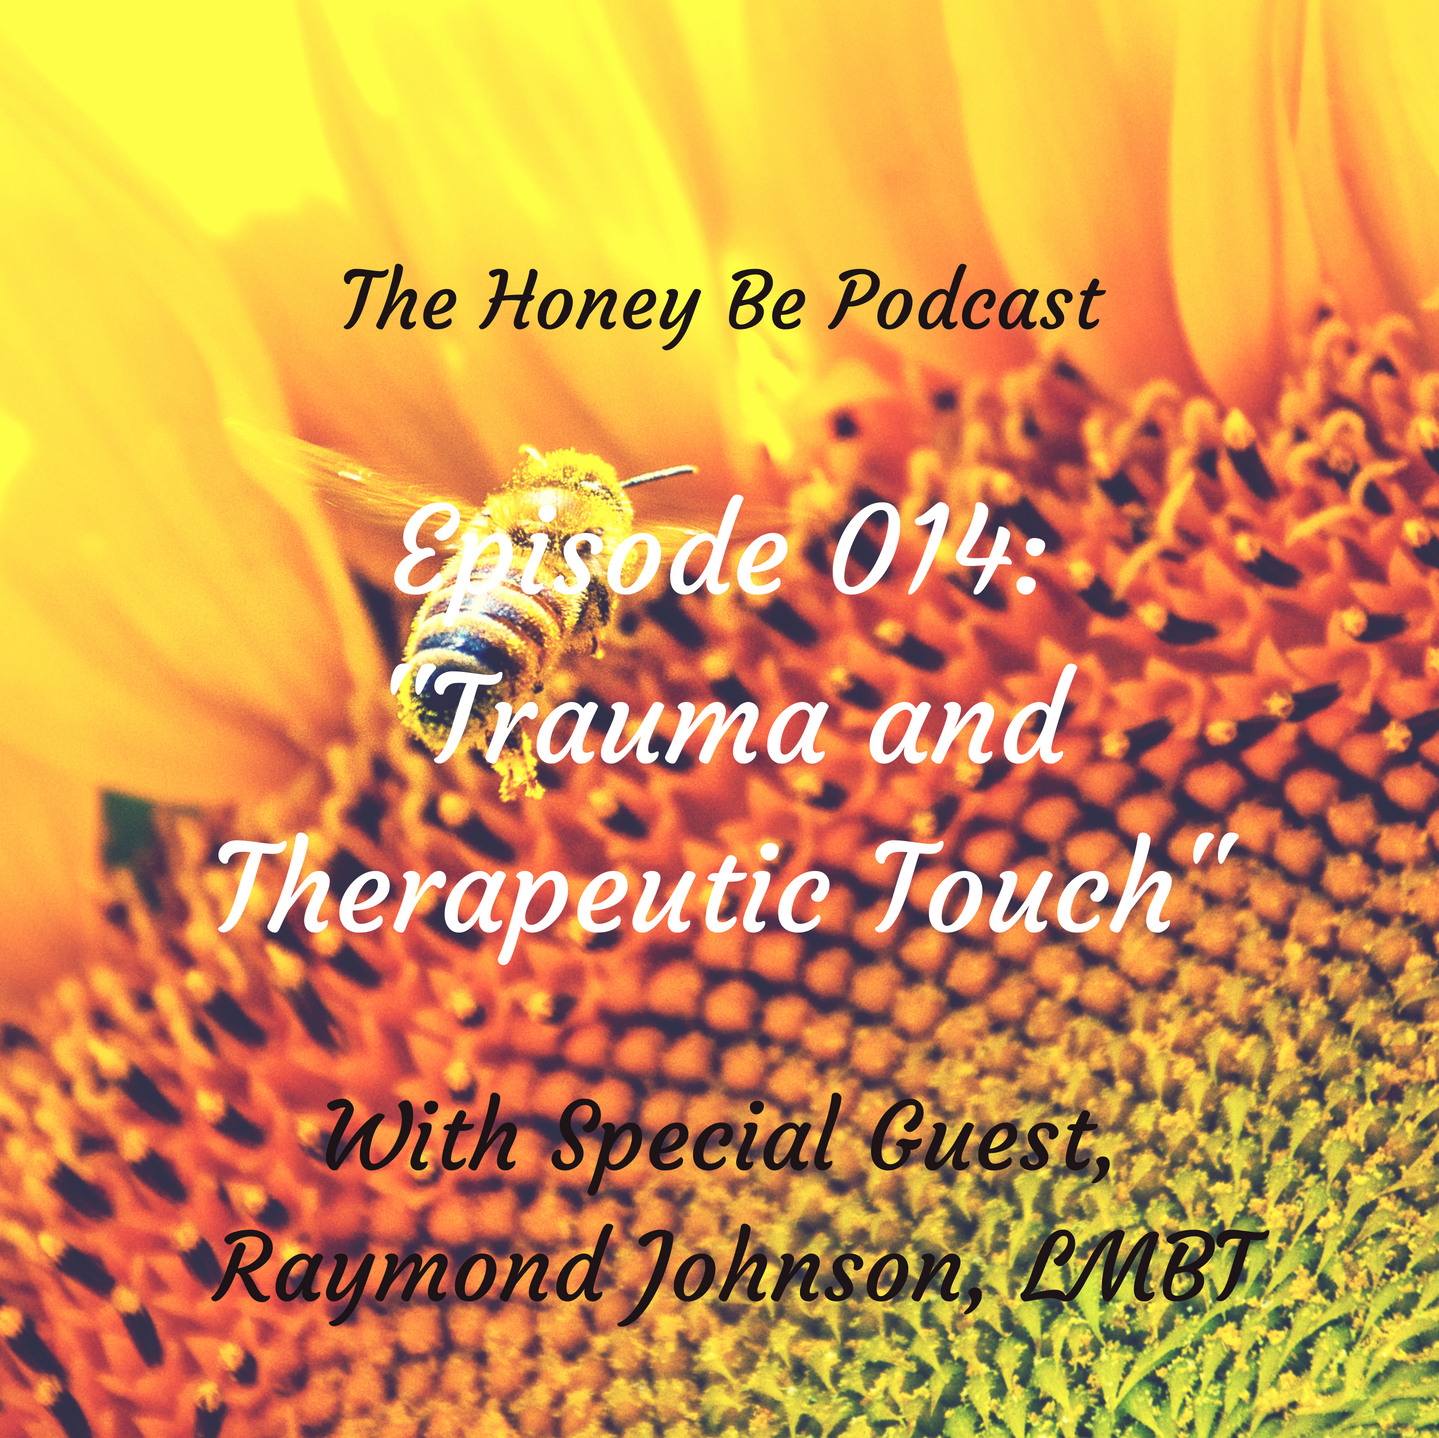 The Honey Be Podcast – Ep. 014: “Trauma and Therapeutic Touch”